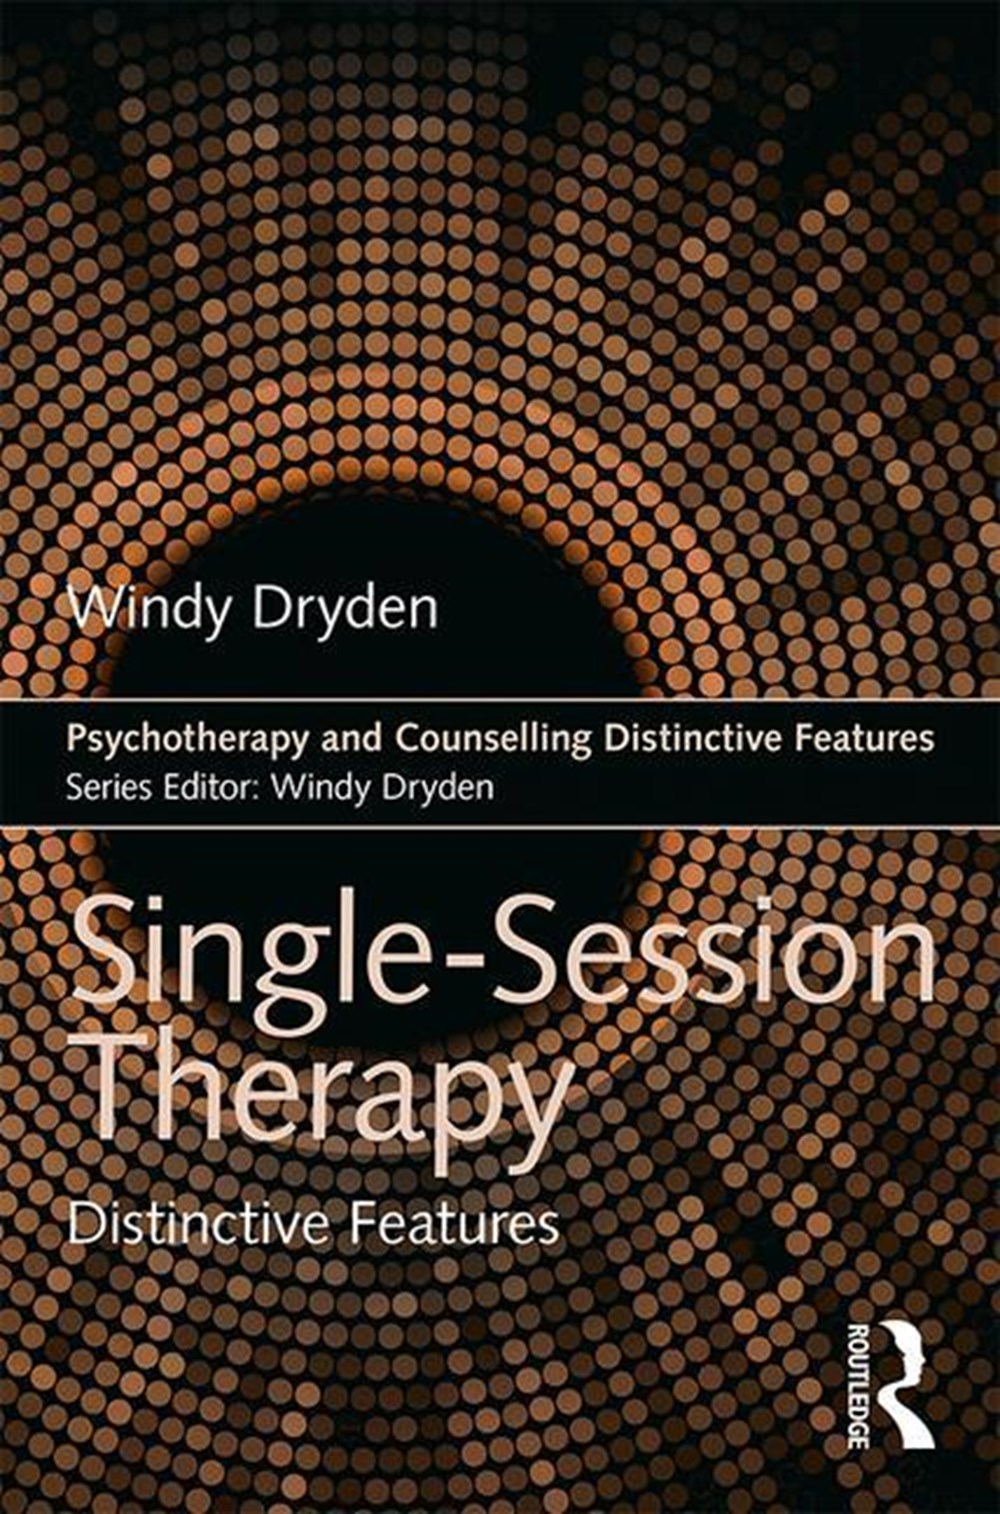 Single-Session Therapy: Distinctive Features